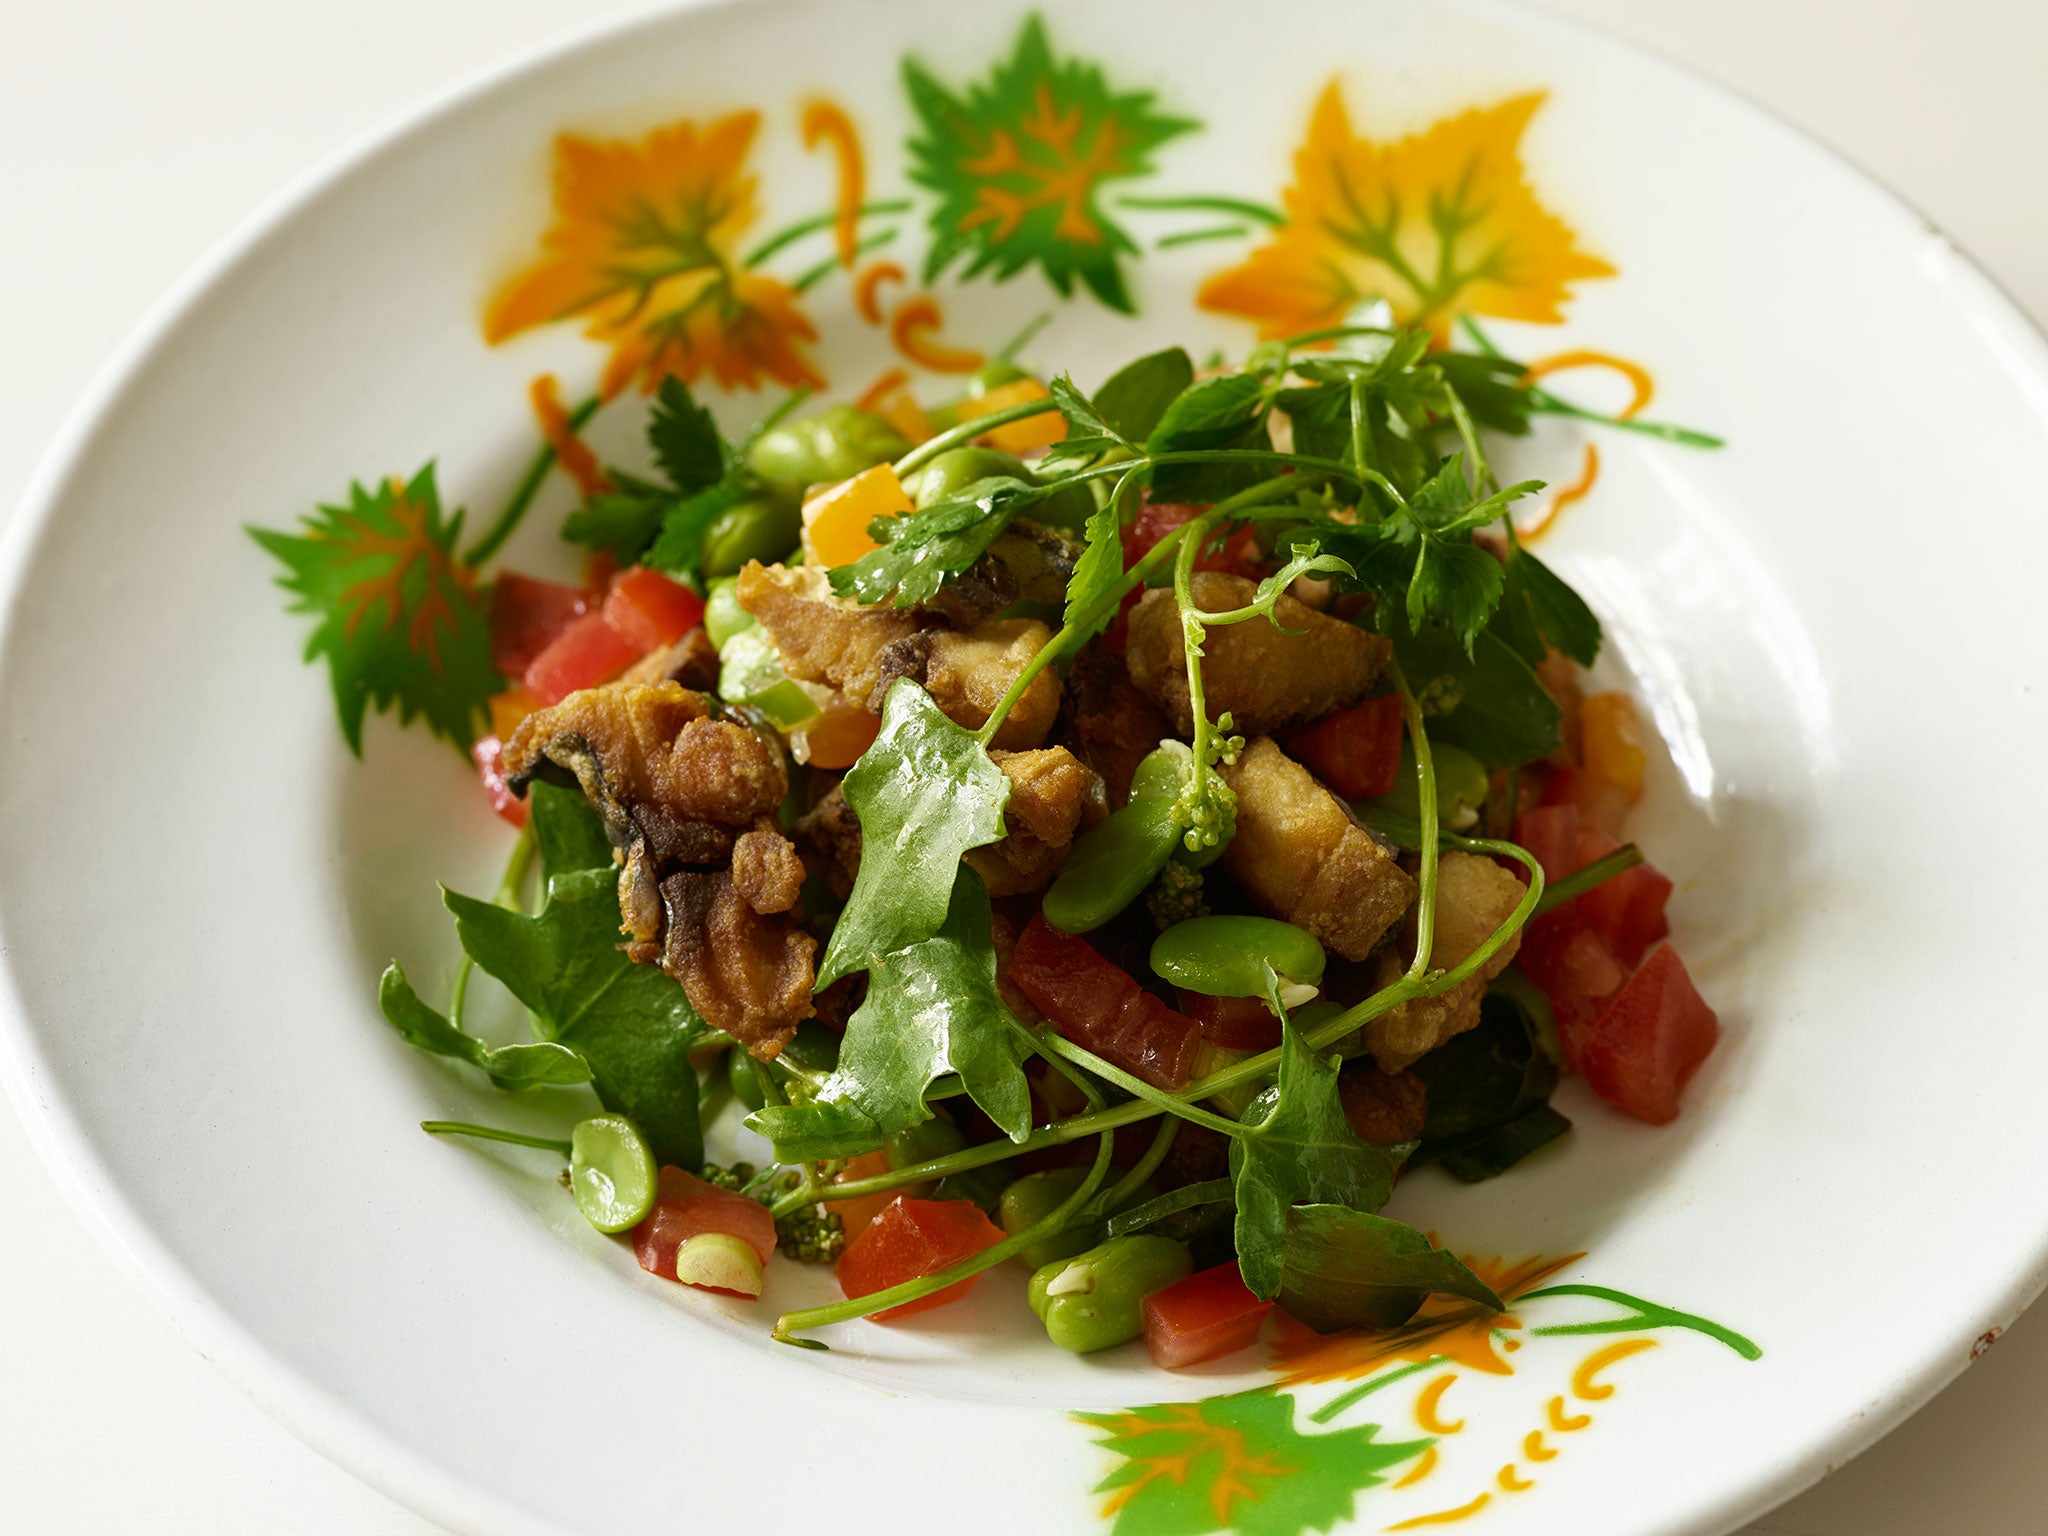 Serve Mark's salad as a starter or a main course